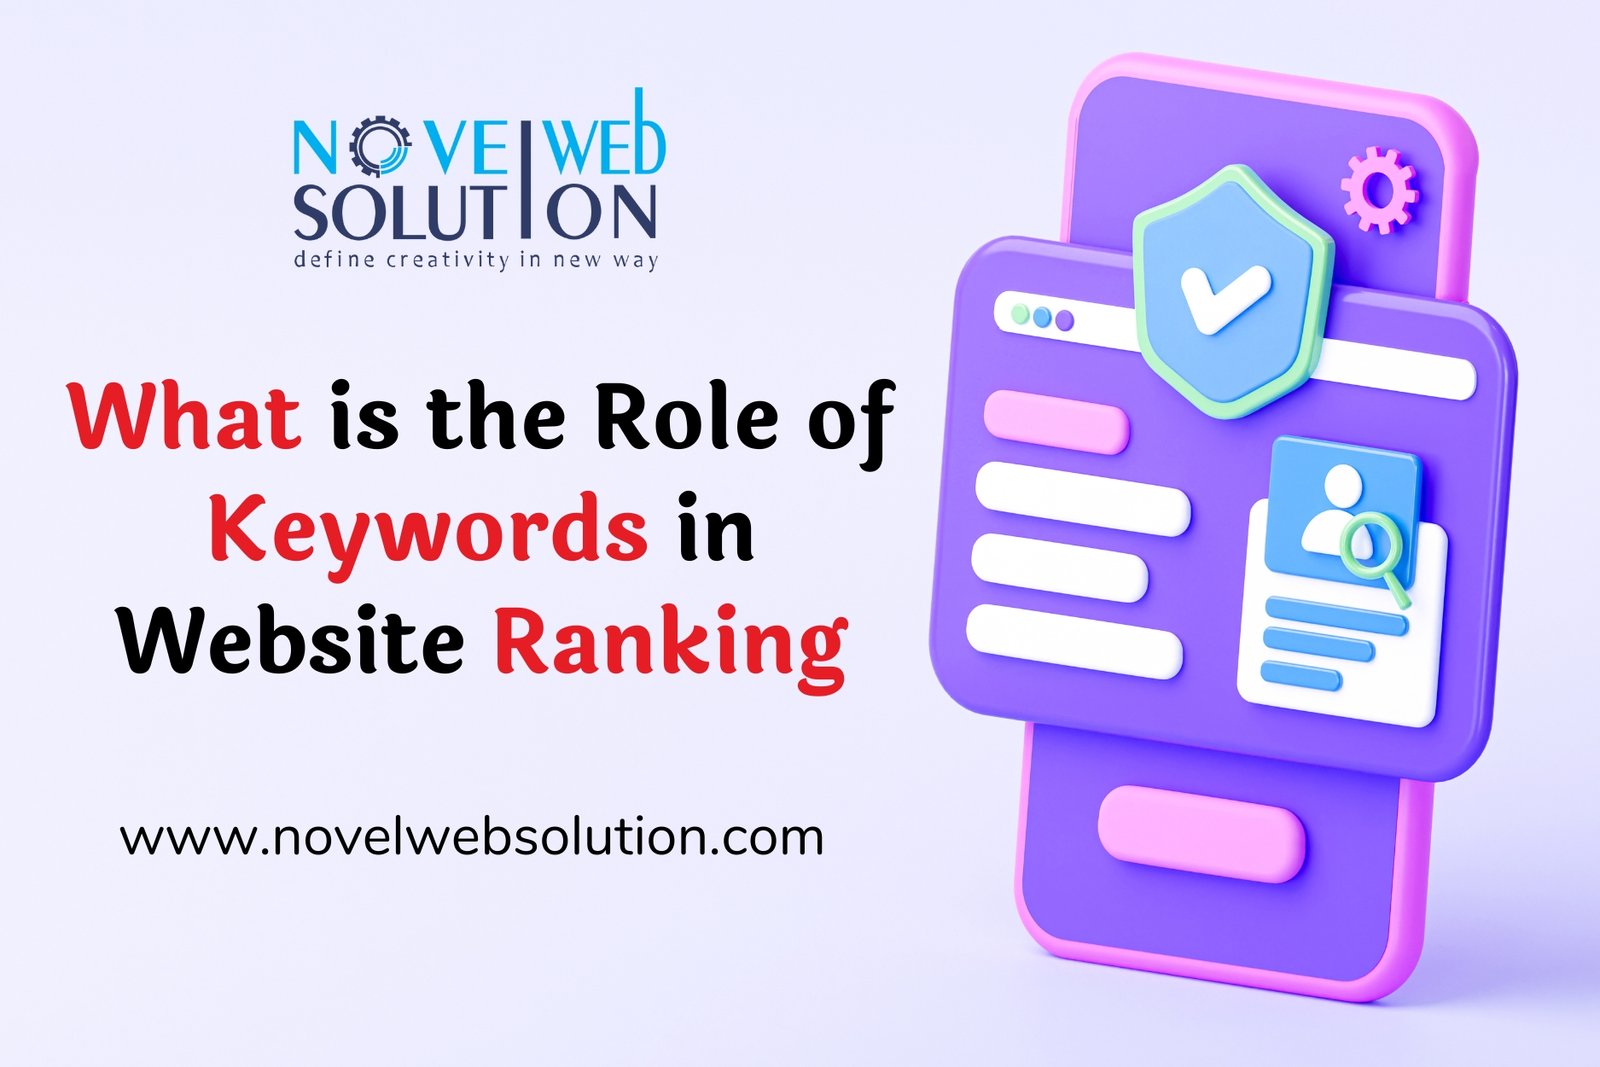 What is the Role of Keywords in Website Ranking